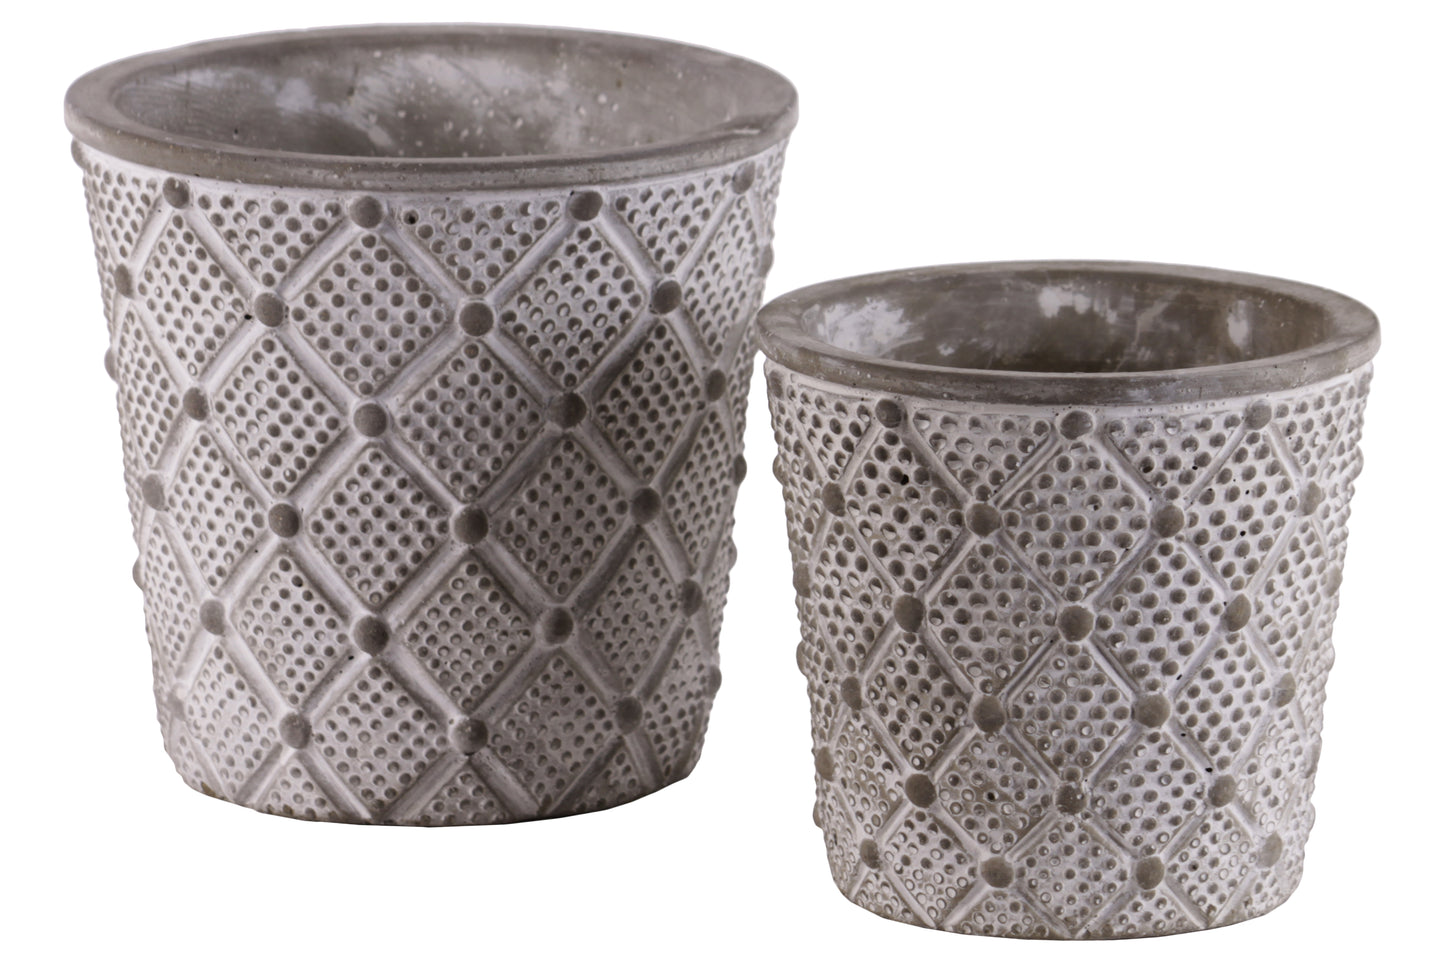 Cement Round Pot with Diamond and Dots Lattice Pattern Design Body, Set of 2